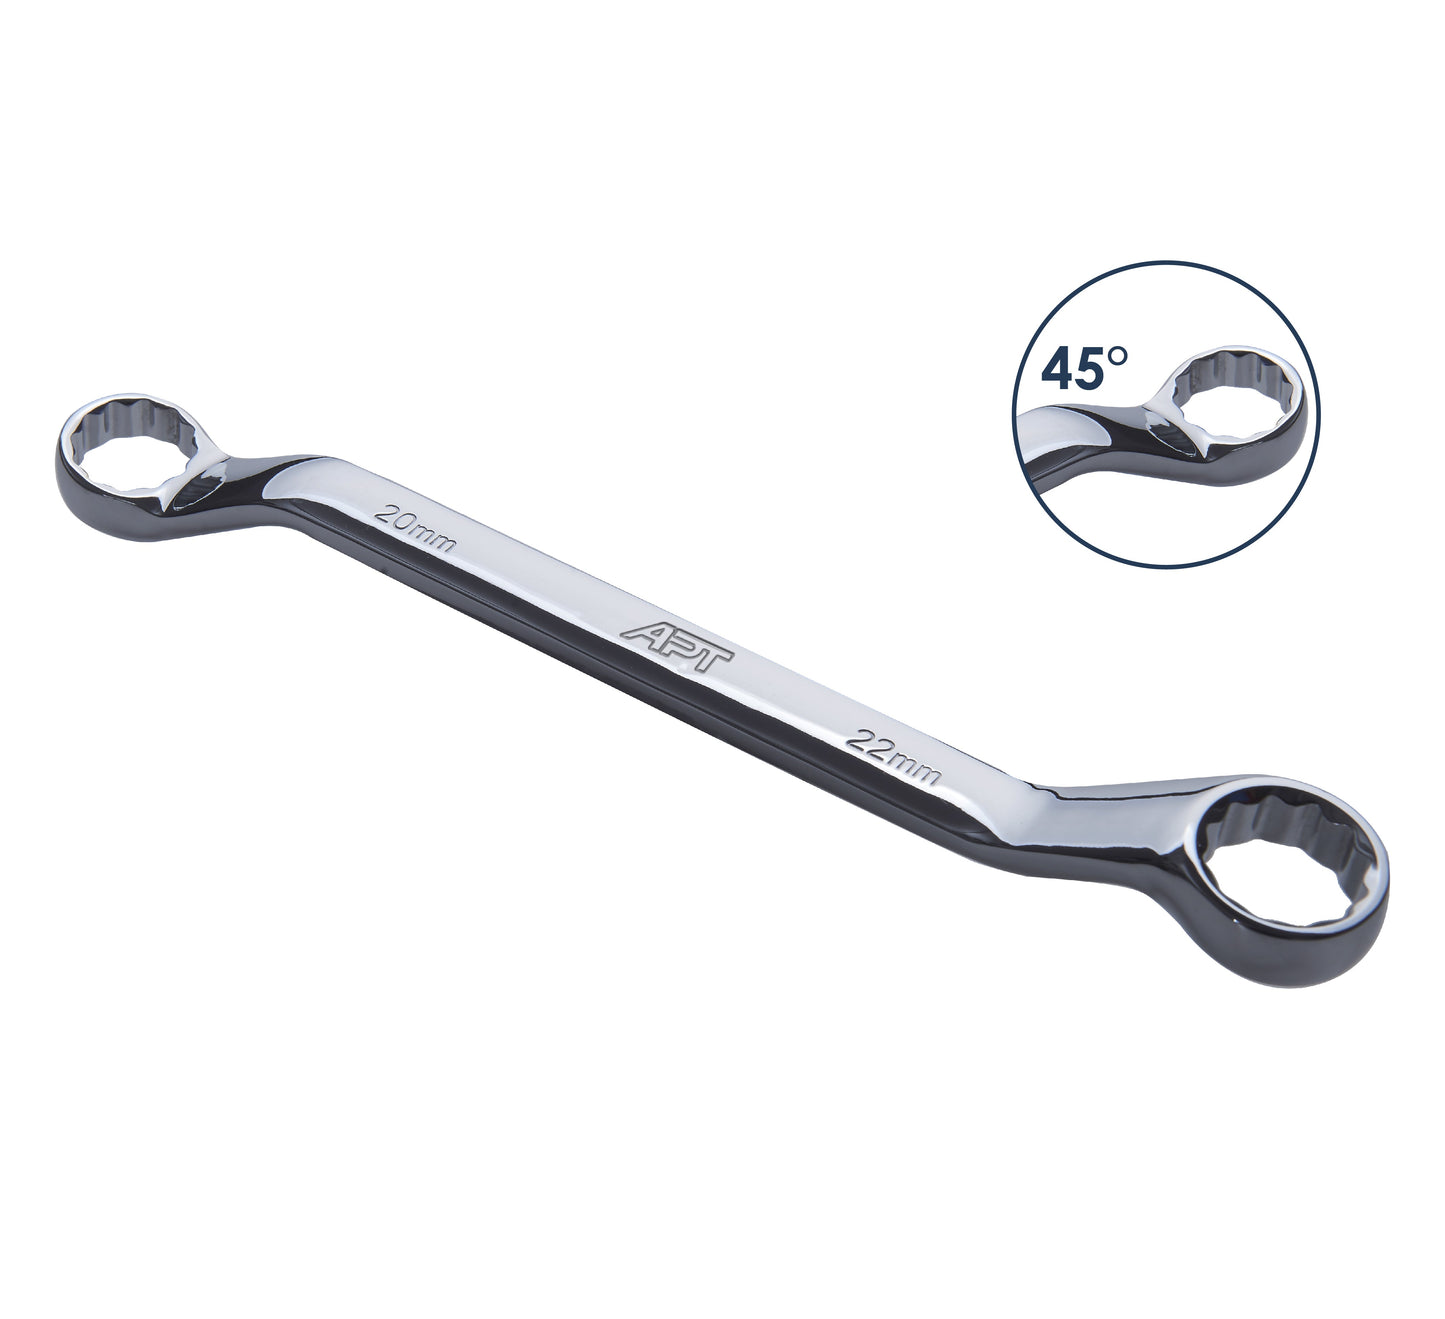 APT DOUBLE OFFSET RING WRENCH BRIGHT SATIN FINISH PP CARD HOLDER CR-V 06X07MM-AH201401-06X07